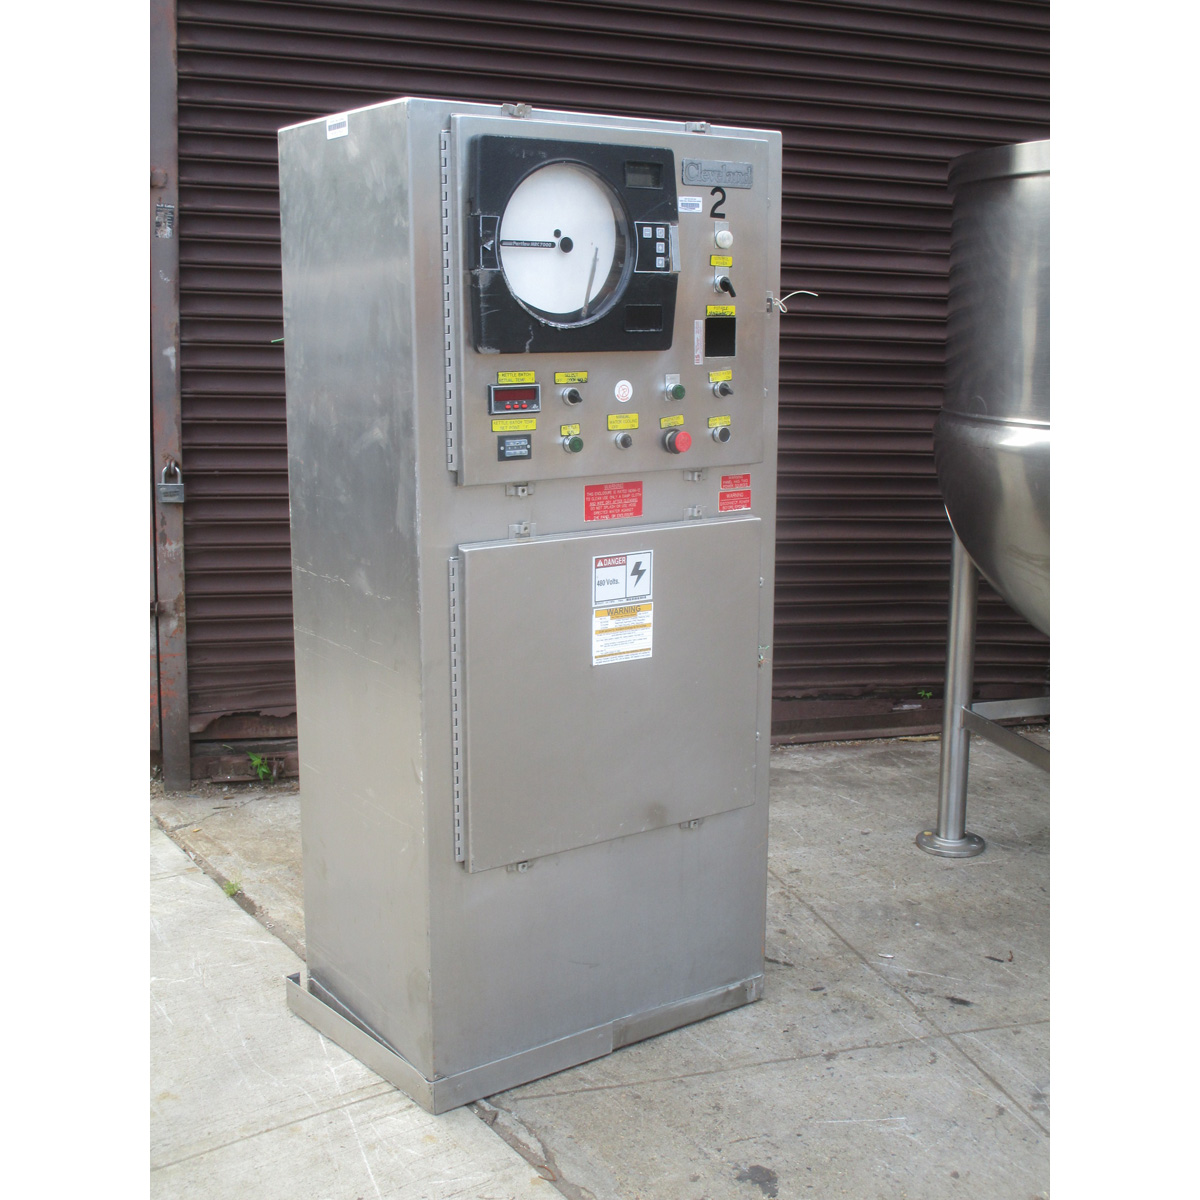 Cleveland HA-MKDL-200-CC 200 Gal Direct Steam Kettle, Body & Control Box, Sold As Is image 3